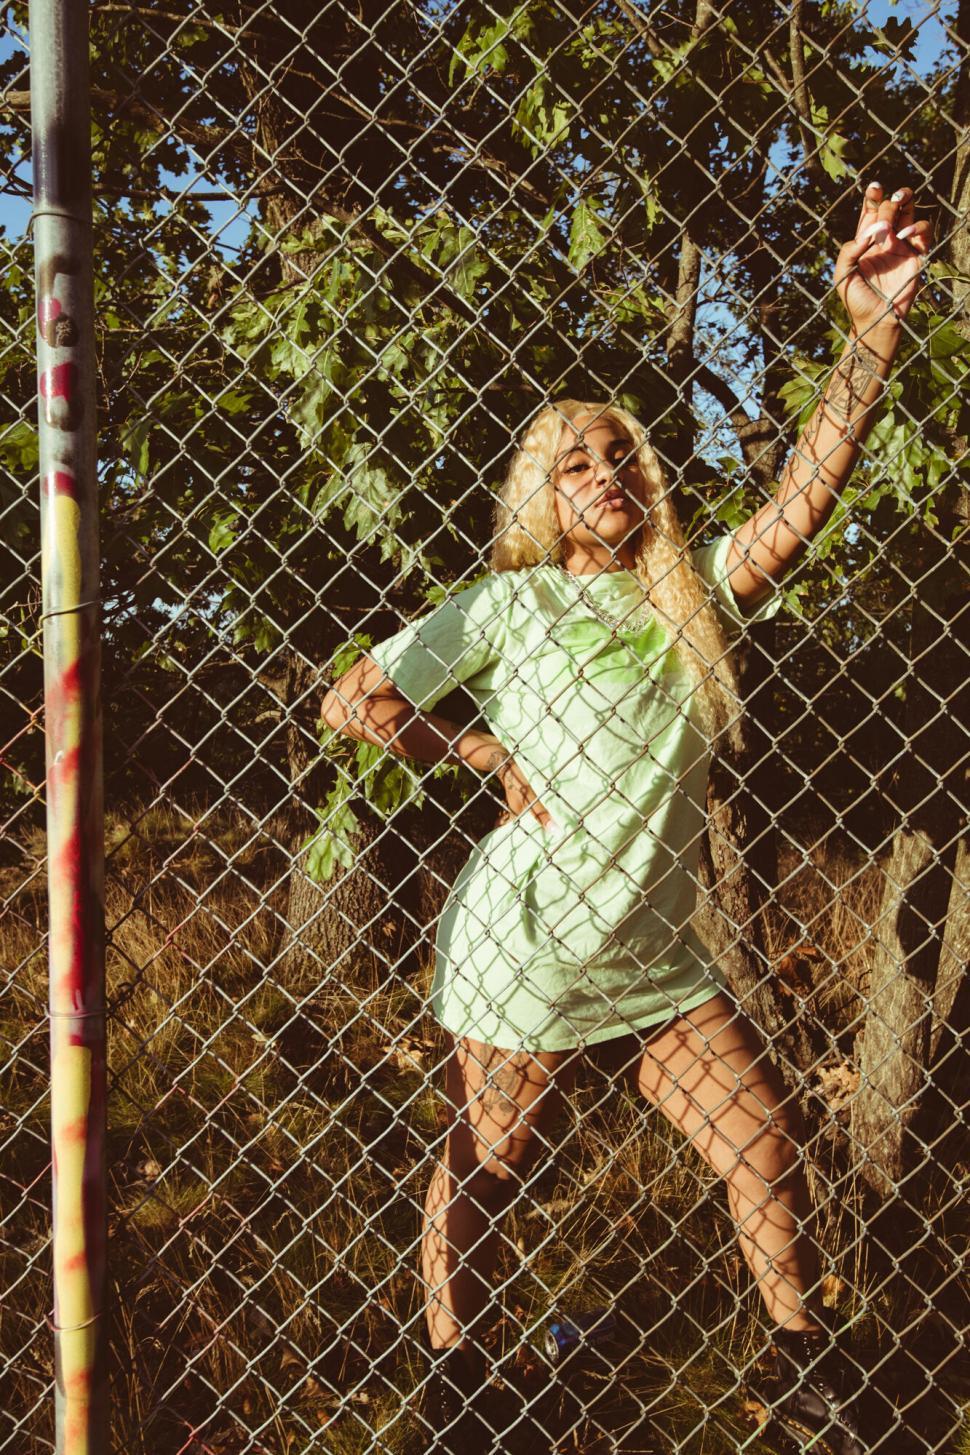 Free Image of Woman dancing by chain-link fence 